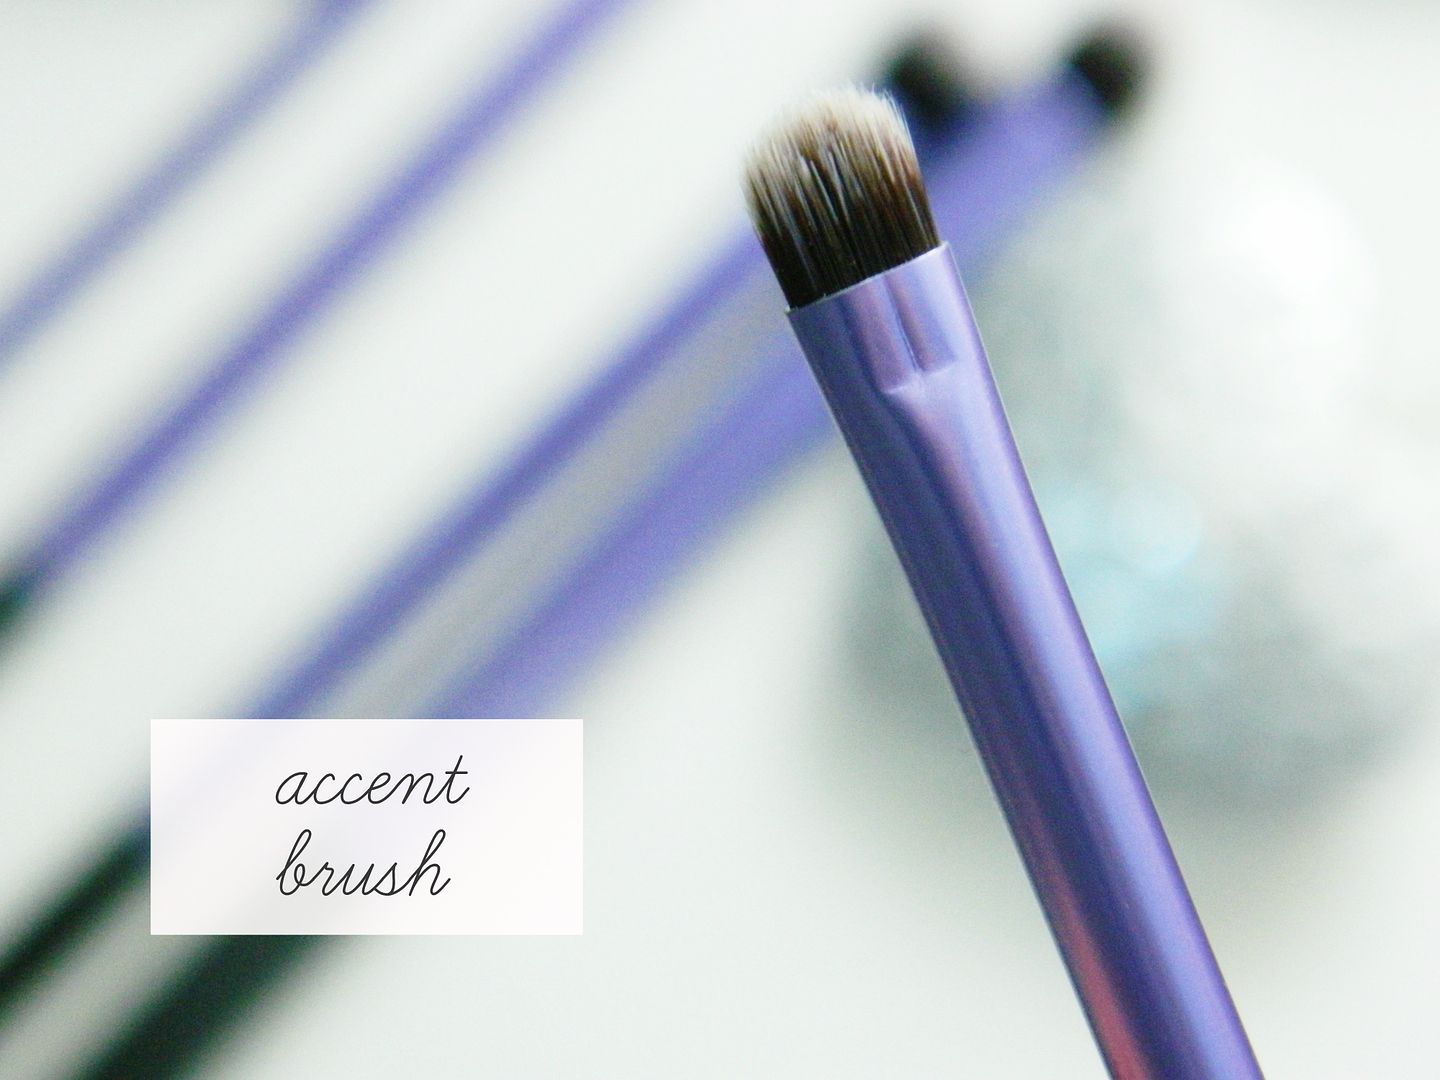 Real Techniques Starter Set Eye Makeup Brushes Accent Brush Review Belle-amie UK Beauty Fashion Lifestyle Blog